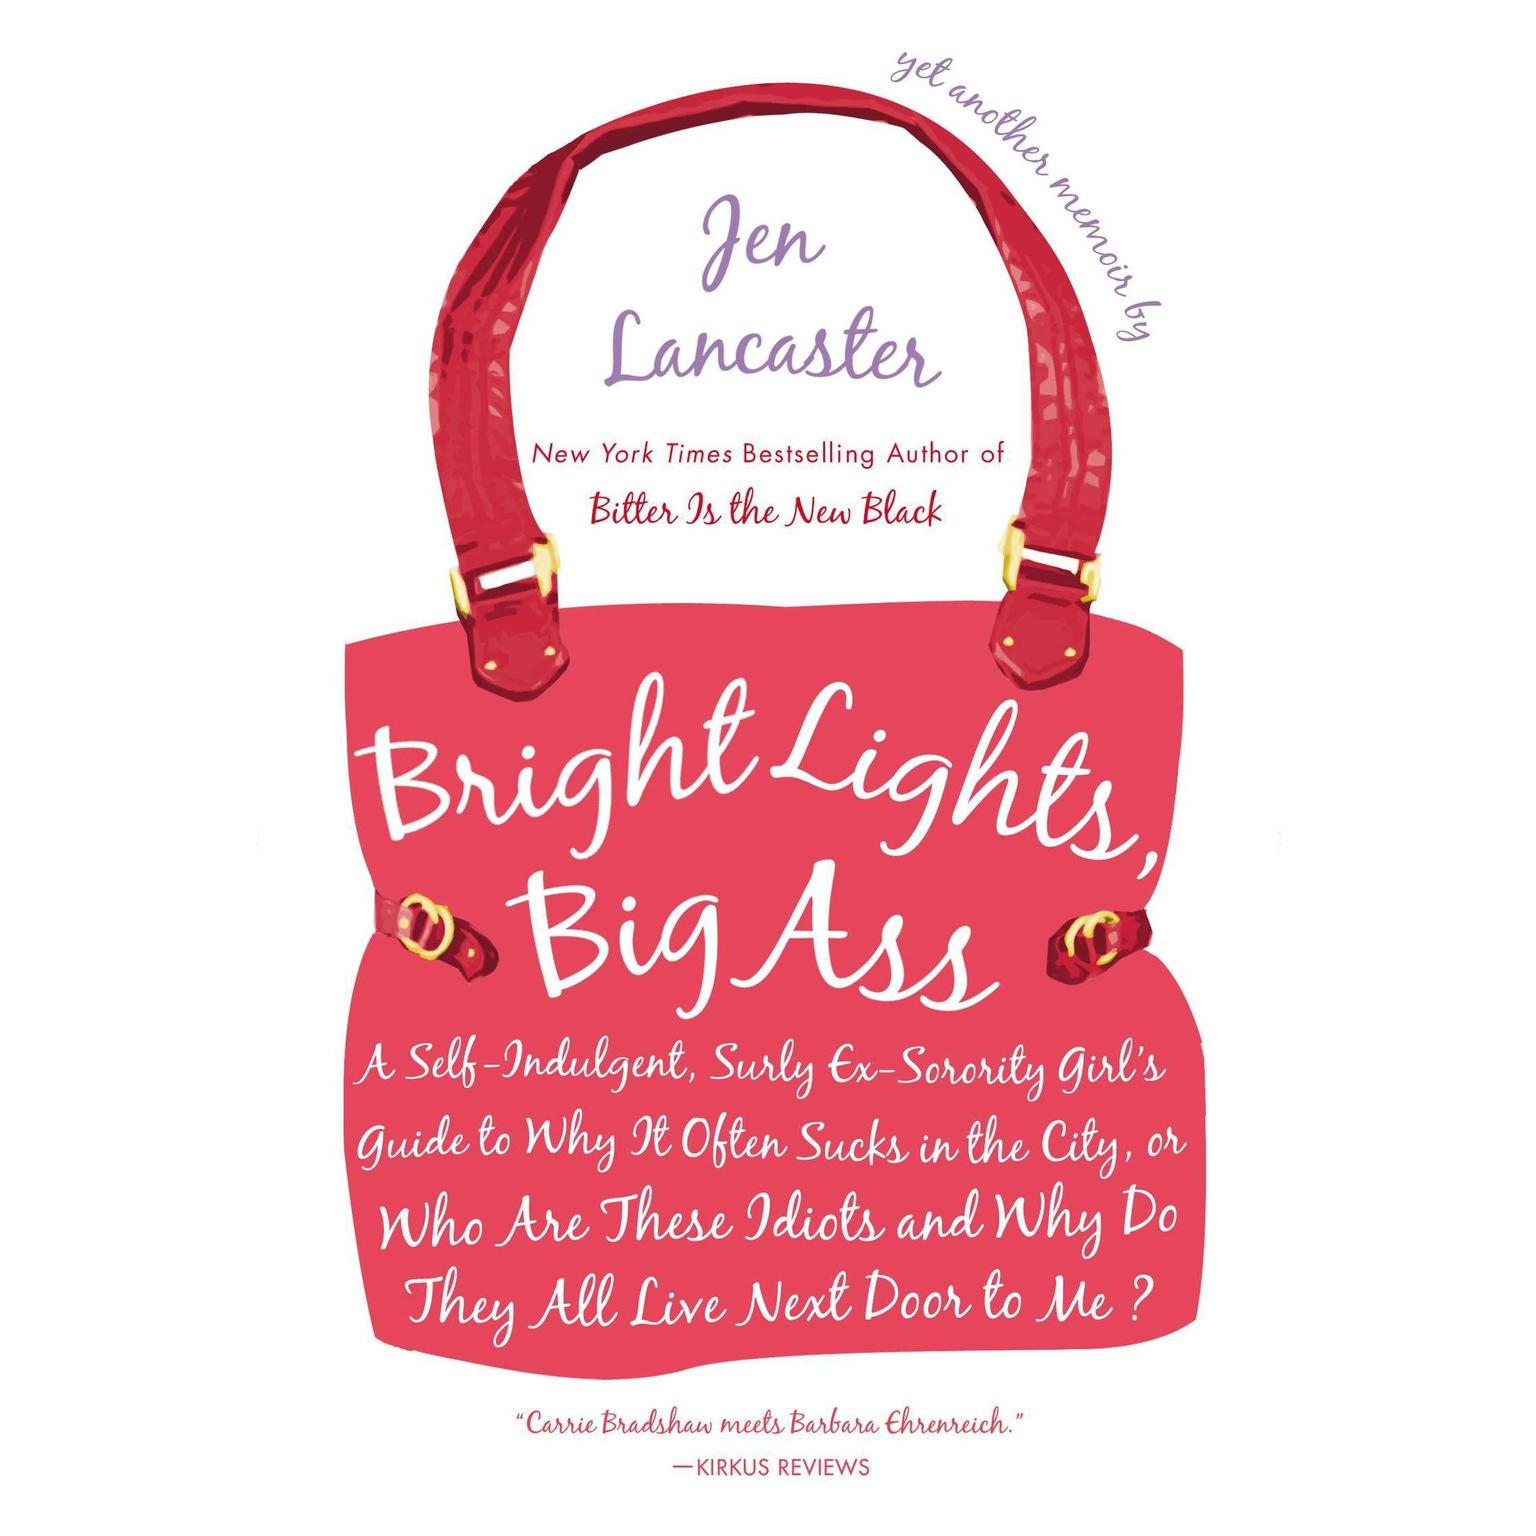 Bright Lights, Big Ass: A Self-Indulgent, Surly, Ex-Sorority Girls Guide to Why it Often Sucks in the City, or Who are These Idiots and Why Do They All Live Next Door to Me? Audiobook, by Jen Lancaster